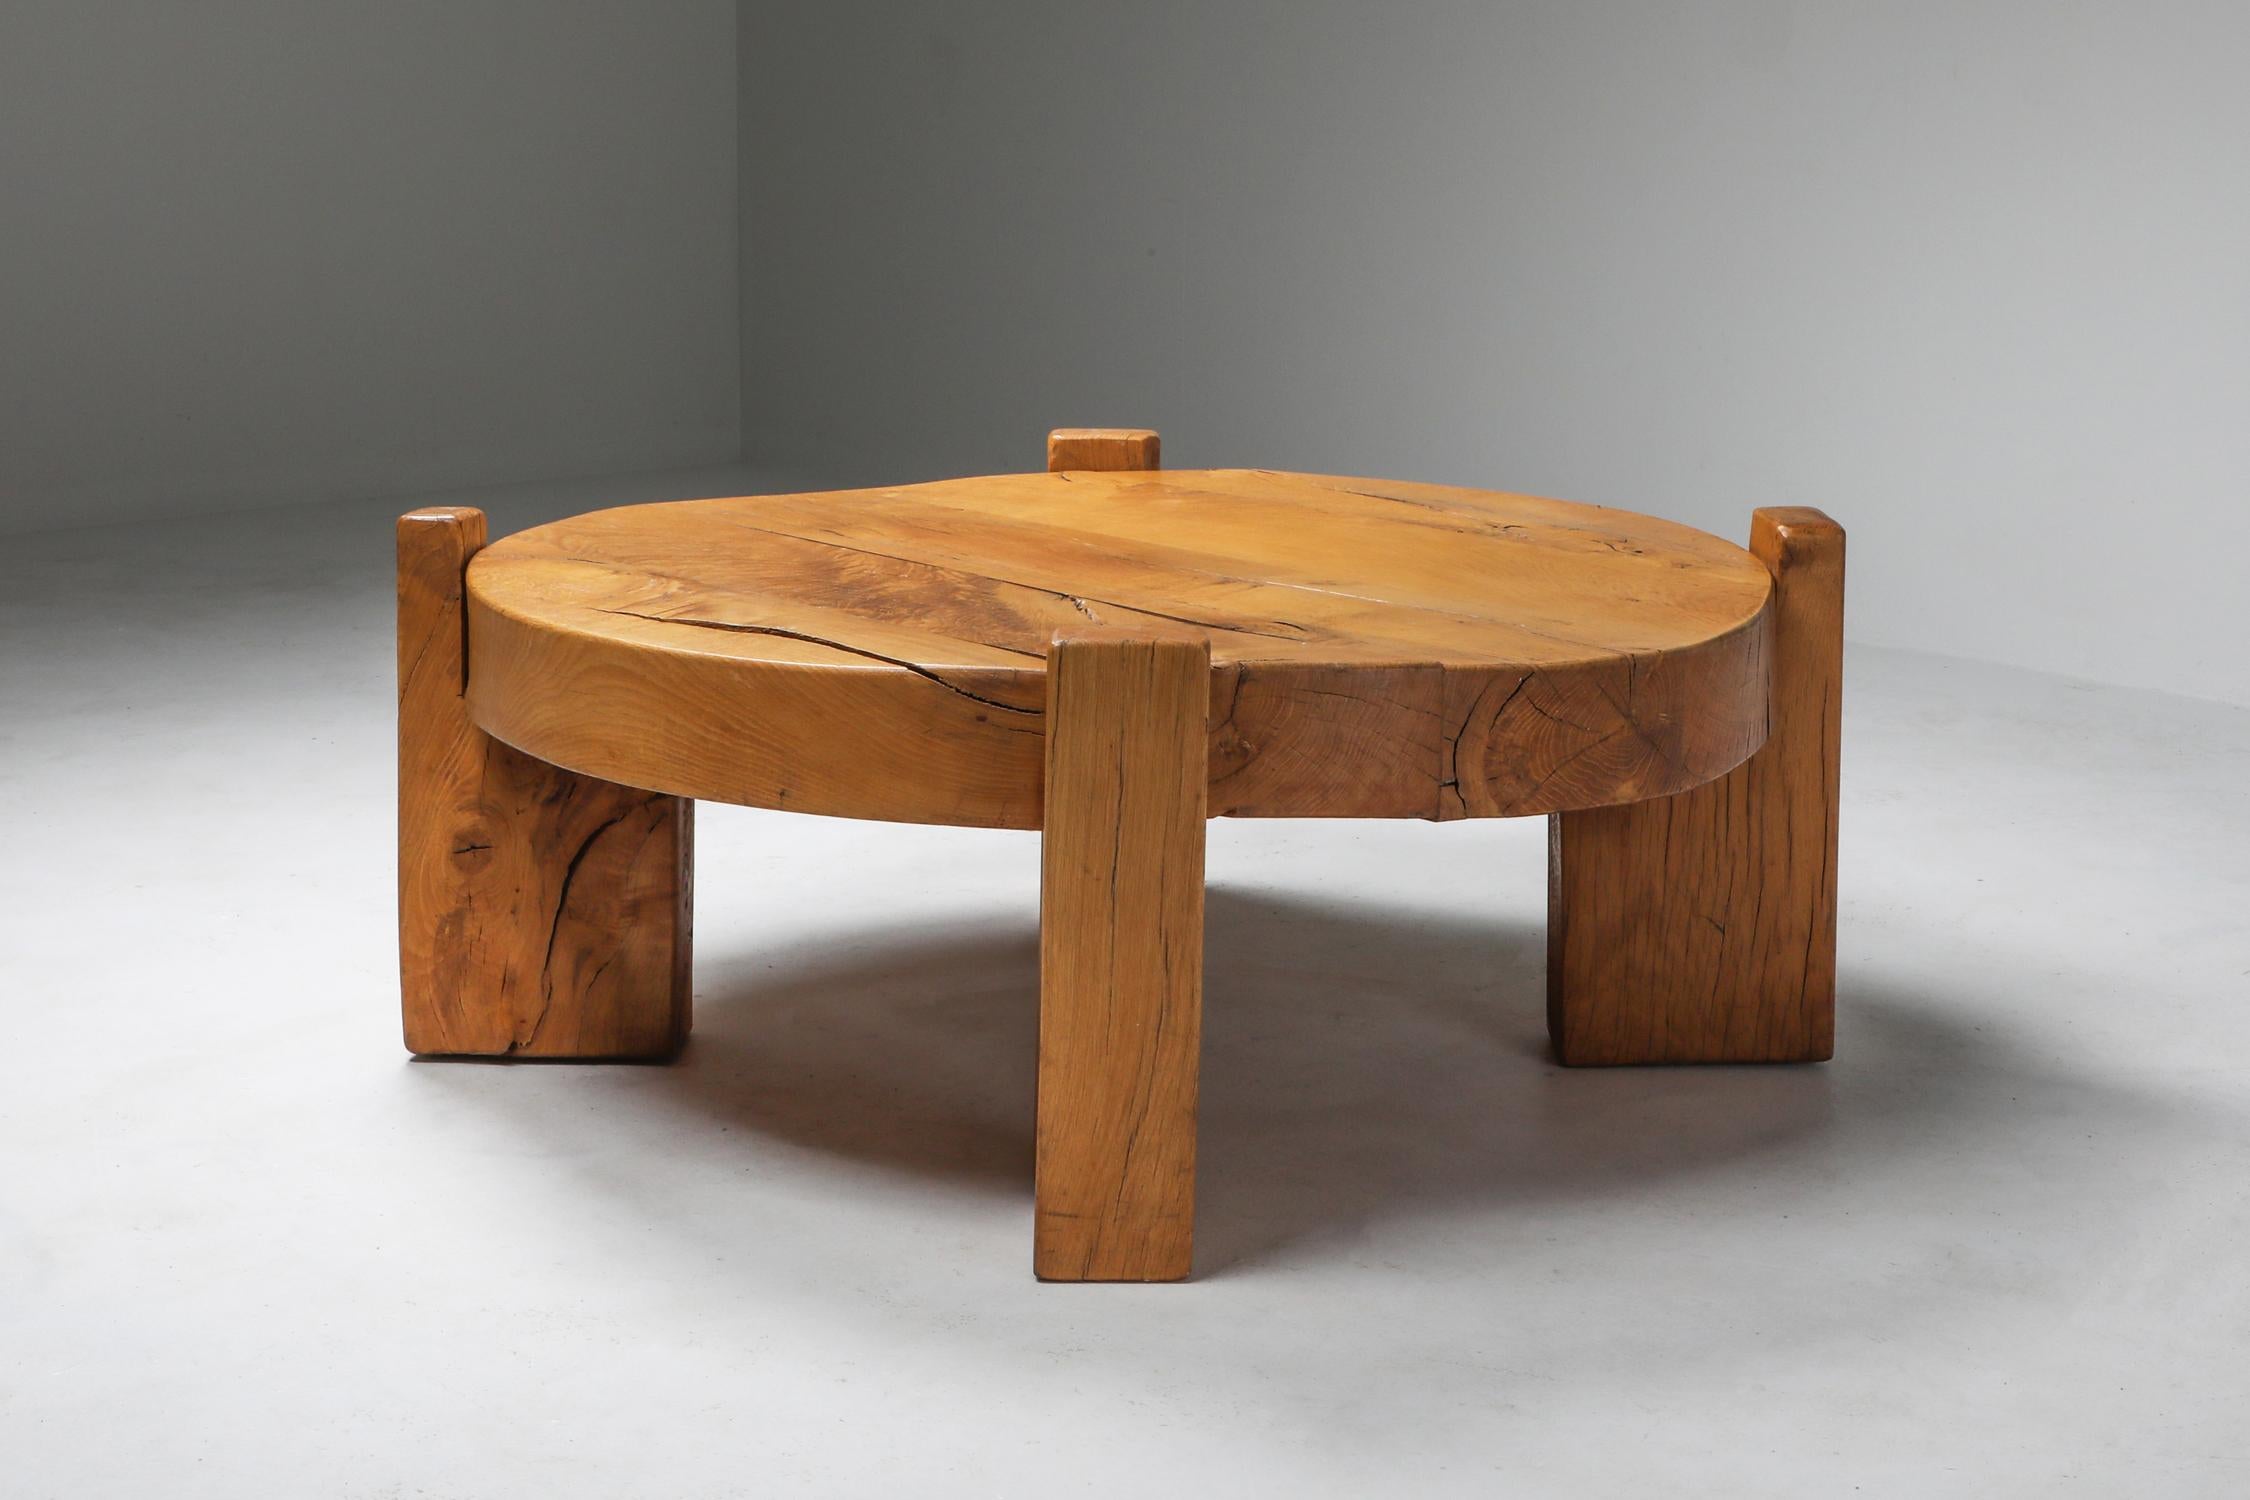 Rustic modern round coffee table in solid oak with four legs, made in Europe, 1960s. Would fit well in a Pierre Chapo inspired interior.
Integrates Brutalist and wabi sabi qualities in one piece.

 